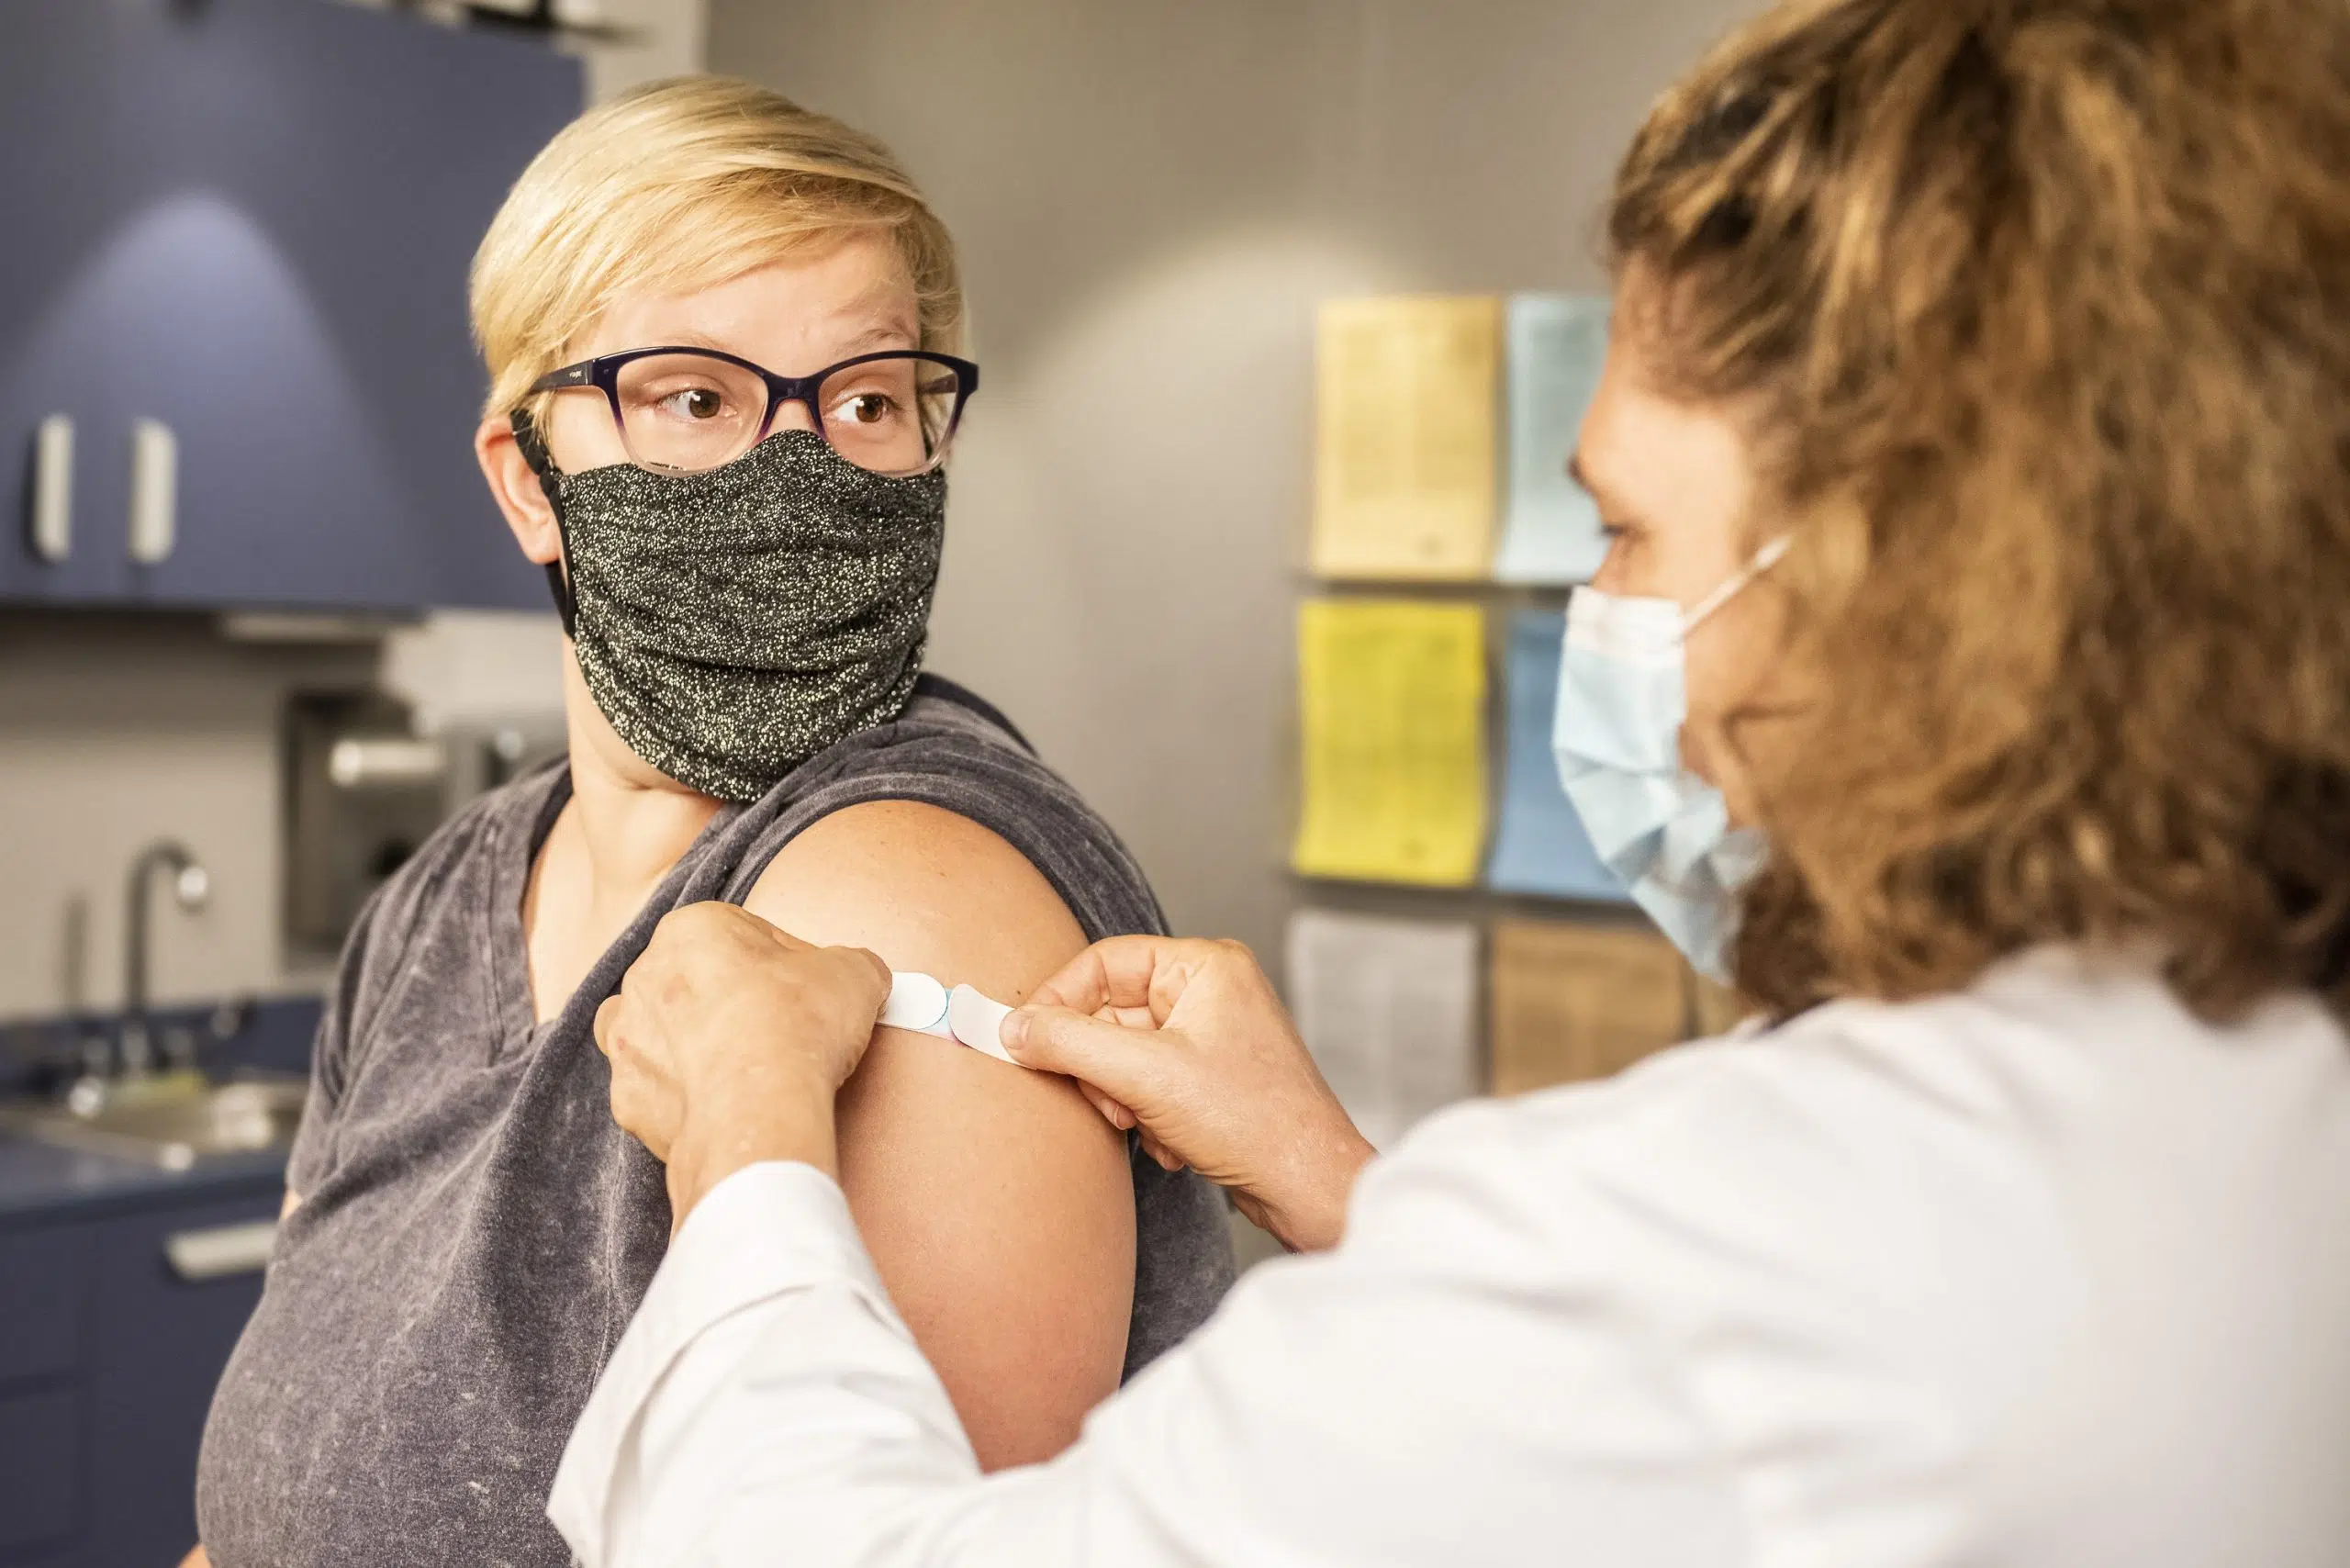 Less than 20% of Ochsner employees are unvaccinated for COVID